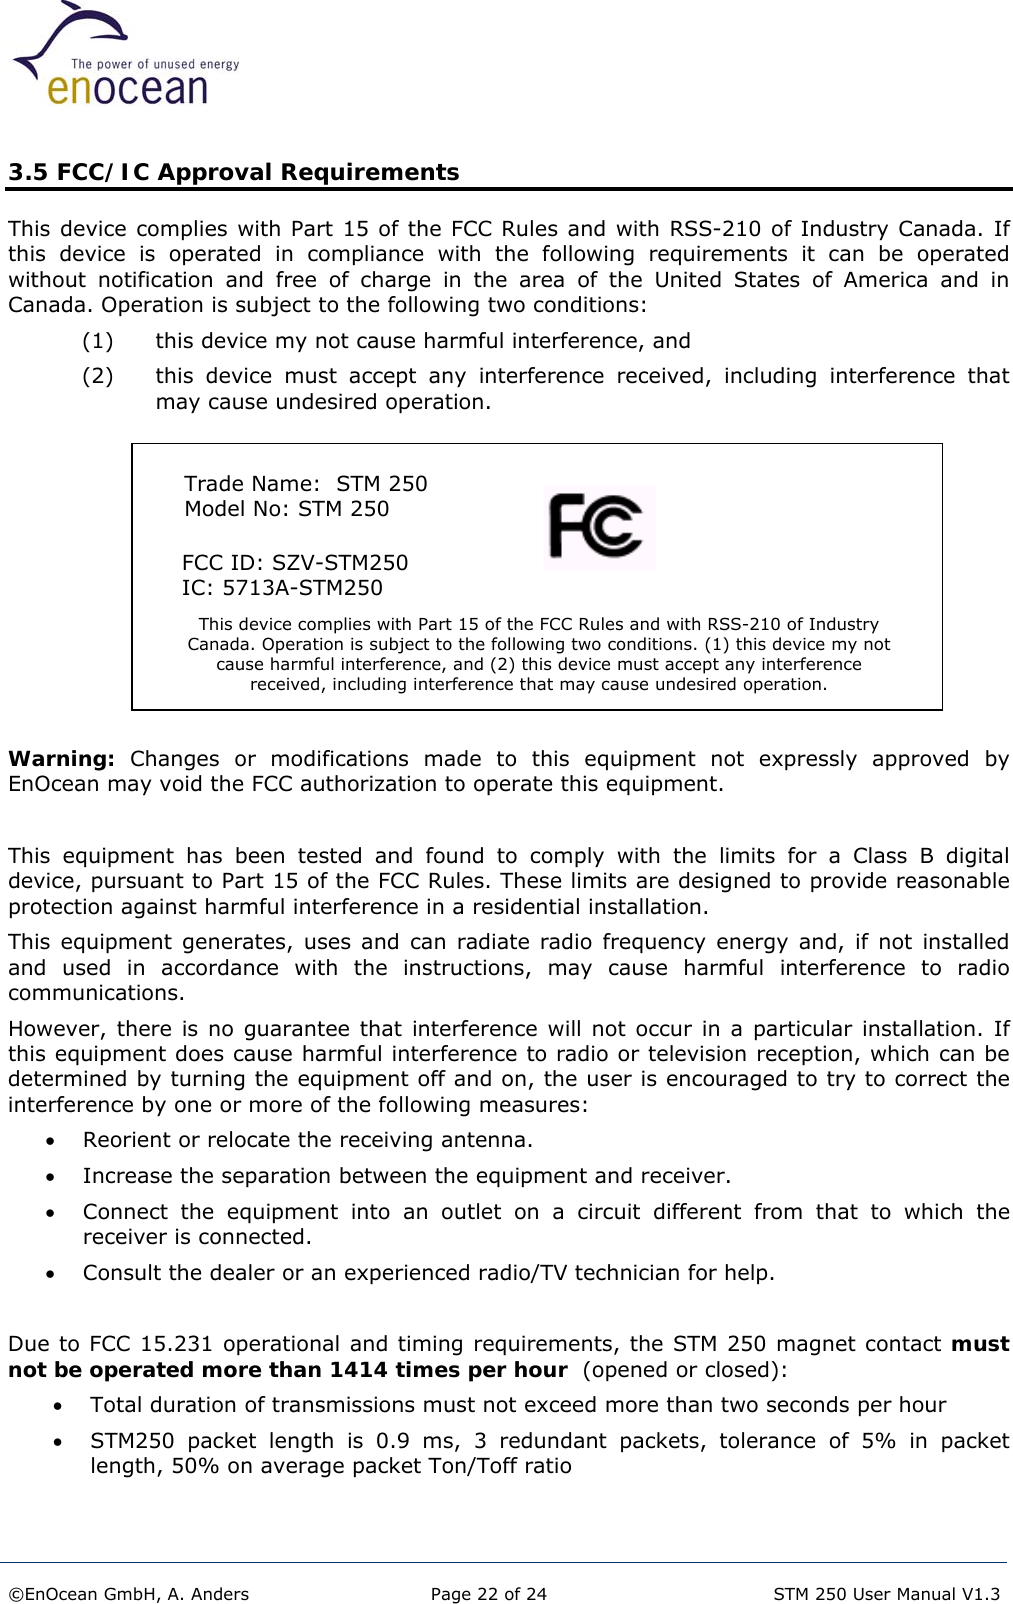  3.5 FCC/IC Approval Requirements This device complies with Part 15 of the FCC Rules and with RSS-210 of Industry Canada. If this device is operated in compliance with the following requirements it can be operated without notification and free of charge in the area of the United States of America and in Canada. Operation is subject to the following two conditions: (1)  this device my not cause harmful interference, and  (2)  this device must accept any interference received, including interference that may cause undesired operation.          Trade Name:  STM 250  Model No: STM 250 This device complies with Part 15 of the FCC Rules and with RSS-210 of Industry Canada. Operation is subject to the following two conditions. (1) this device my not cause harmful interference, and (2) this device must accept any interference received, including interference that may cause undesired operation.      FCC ID: SZV-STM250      IC: 5713A-STM250 Warning: Changes or modifications made to this equipment not expressly approved by EnOcean may void the FCC authorization to operate this equipment.  This equipment has been tested and found to comply with the limits for a Class B digital device, pursuant to Part 15 of the FCC Rules. These limits are designed to provide reasonable protection against harmful interference in a residential installation.  This equipment generates, uses and can radiate radio frequency energy and, if not installed and used in accordance with the instructions, may cause harmful interference to radio communications.   However, there is no guarantee that interference will not occur in a particular installation. If this equipment does cause harmful interference to radio or television reception, which can be determined by turning the equipment off and on, the user is encouraged to try to correct the interference by one or more of the following measures: •  Reorient or relocate the receiving antenna. •  Increase the separation between the equipment and receiver. •  Connect the equipment into an outlet on a circuit different from that to which the receiver is connected. •  Consult the dealer or an experienced radio/TV technician for help.  Due to FCC 15.231 operational and timing requirements, the STM 250 magnet contact must not be operated more than 1414 times per hour  (opened or closed): •  Total duration of transmissions must not exceed more than two seconds per hour •  STM250 packet length is 0.9 ms, 3 redundant packets, tolerance of 5% in packet length, 50% on average packet Ton/Toff ratio   ©EnOcean GmbH, A. Anders  Page 22 of 24   STM 250 User Manual V1.3  